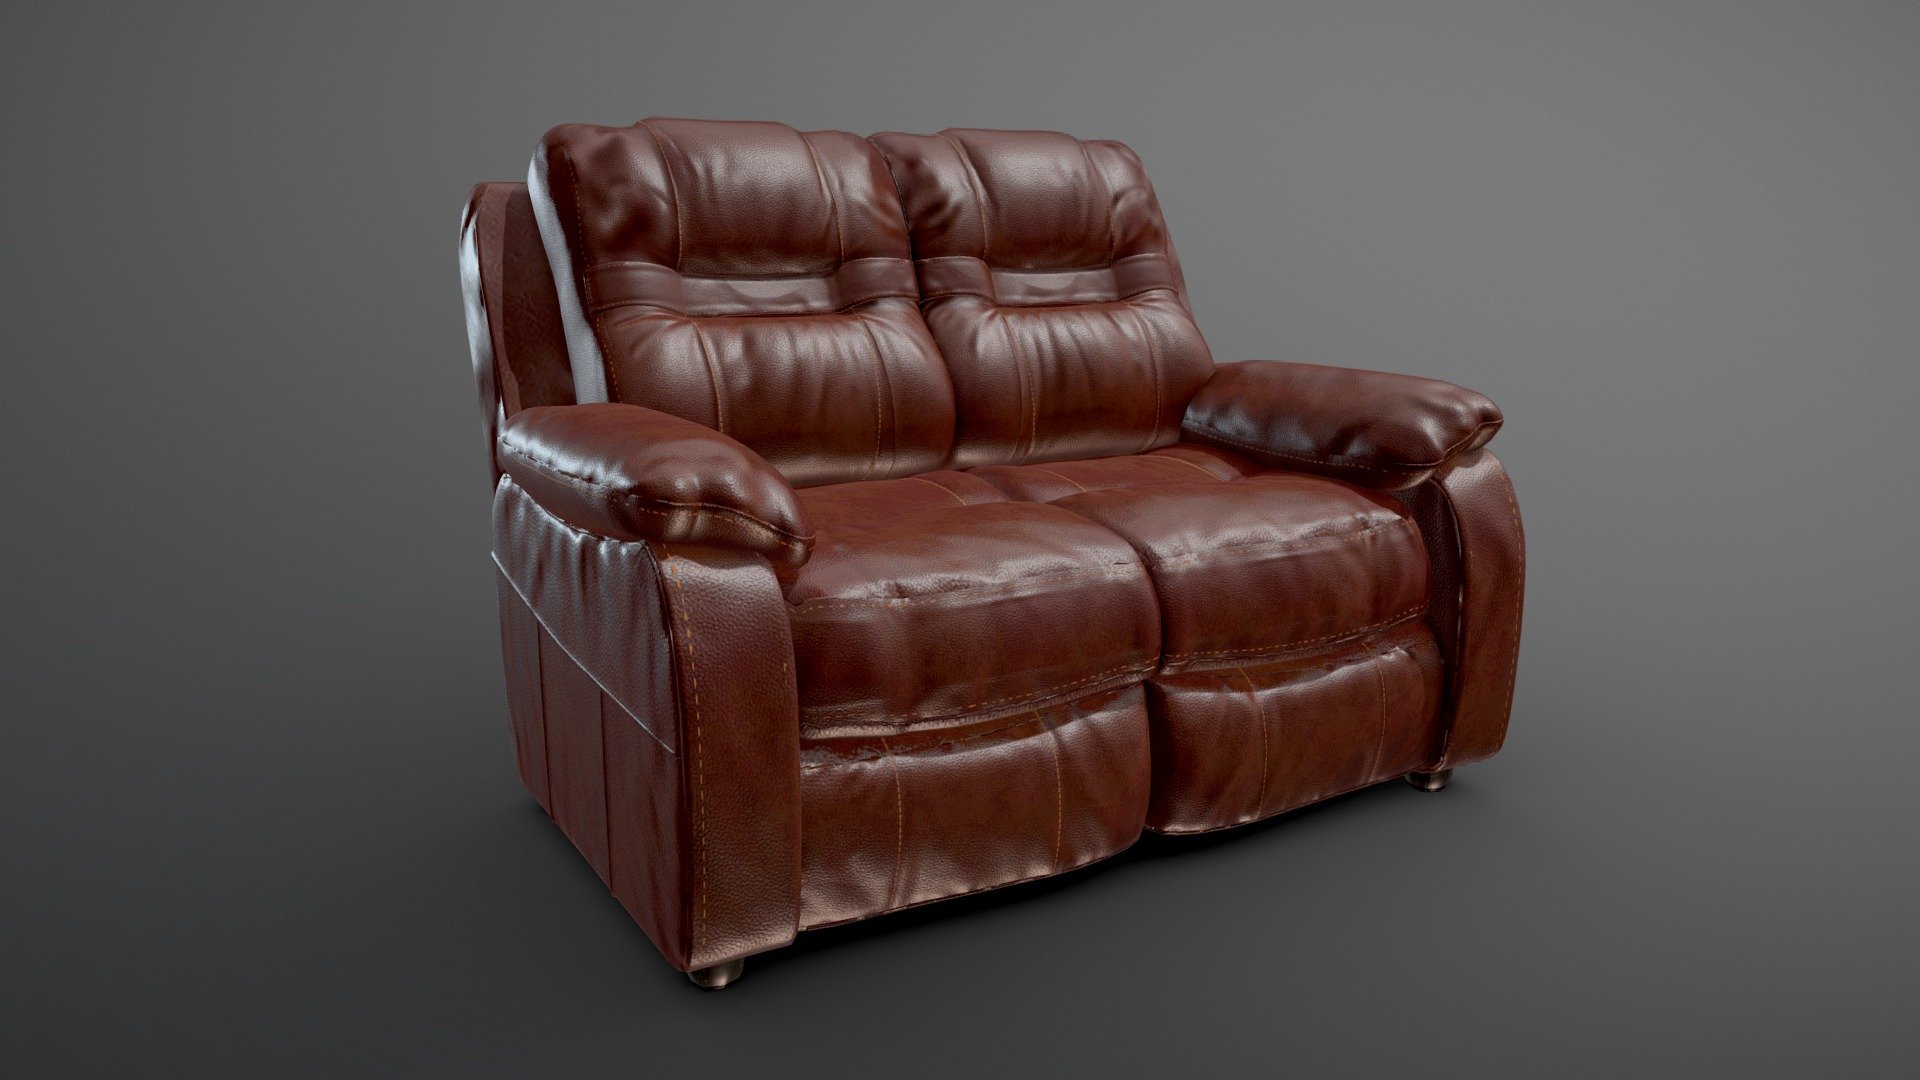 This is model of leather Sofa with detailed normals made in Zbrush and textured in Substance Painter.
Hope you find this model useful :)
Cheers! - Sofa - Download Free 3D model by Serious Black 19 (@seriousblack_19) 3d model